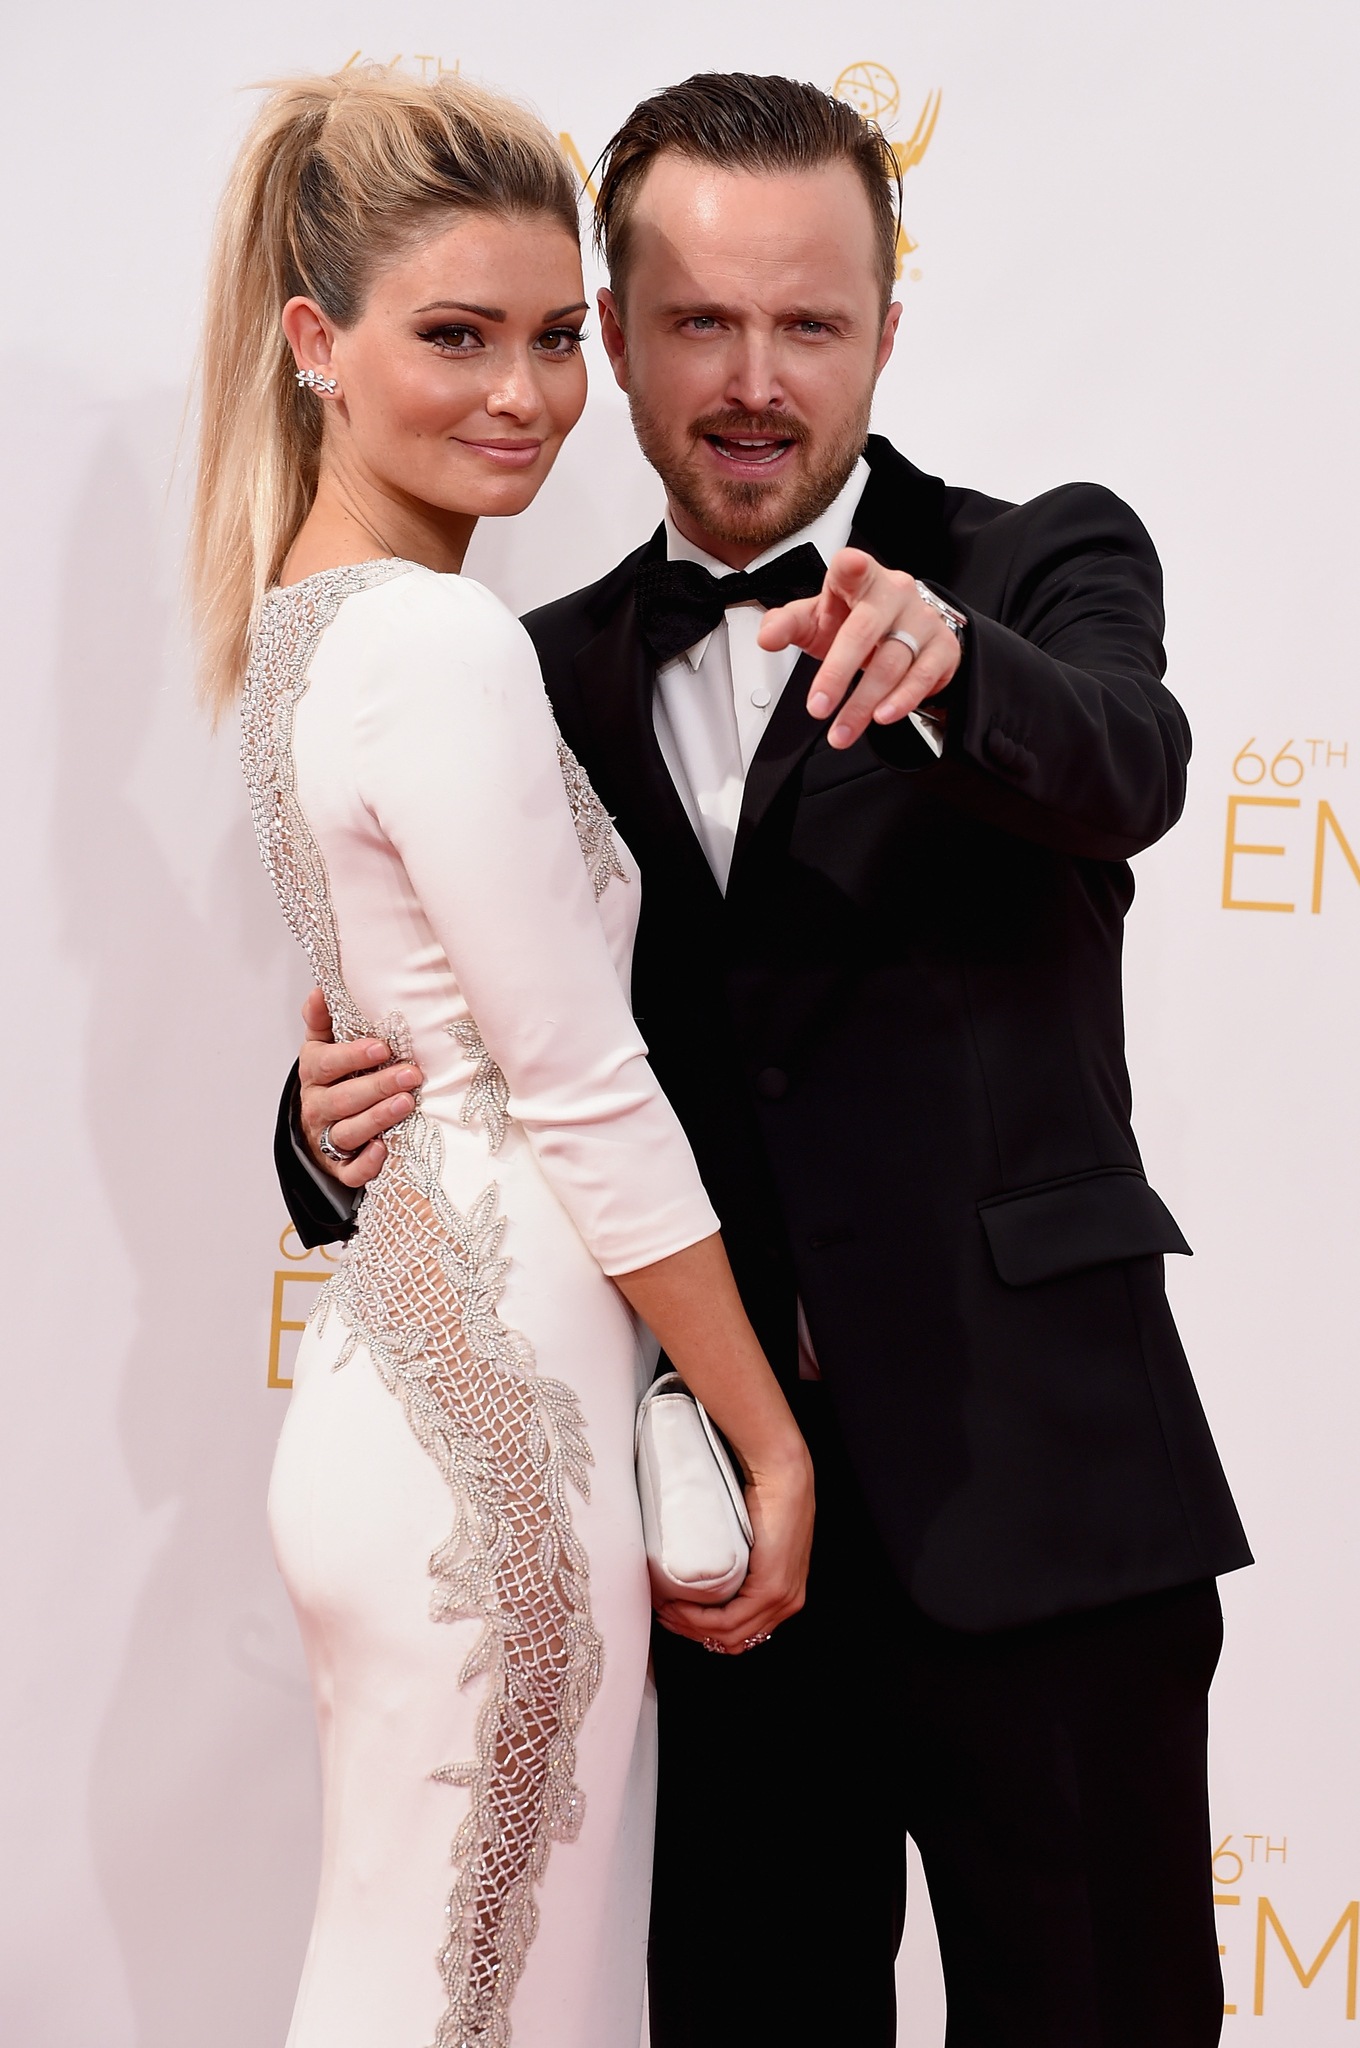 Aaron Paul and Lauren Parsekian at event of The 66th Primetime Emmy Awards (2014)